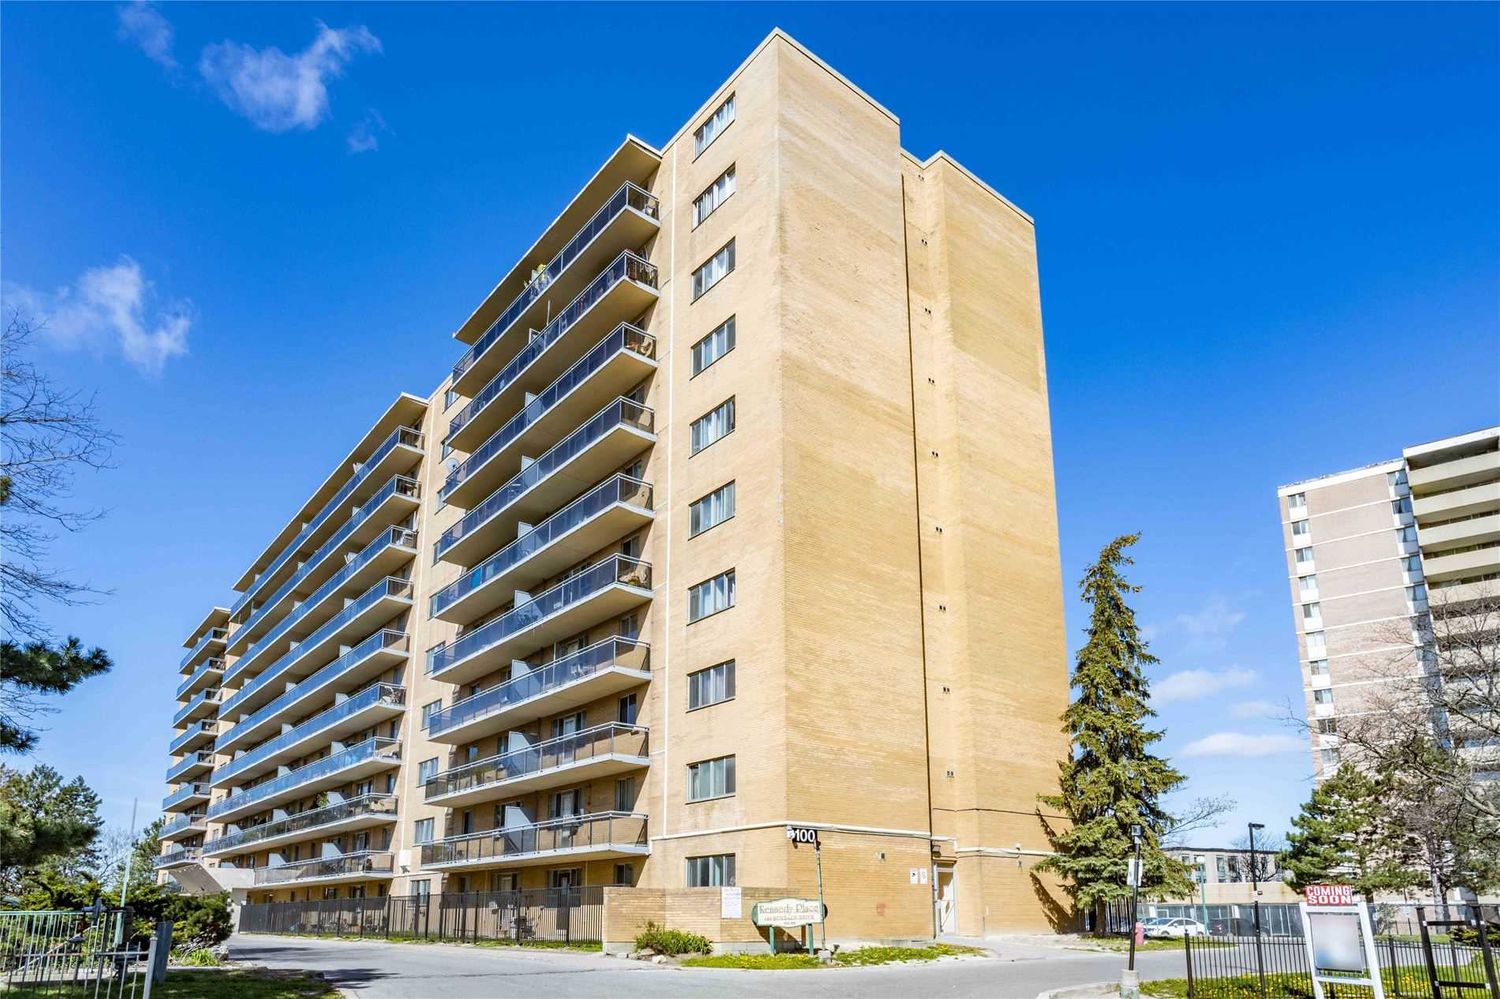 100 Dundalk Drive. Kennedy Place Condos is located in  Scarborough, Toronto - image #1 of 3